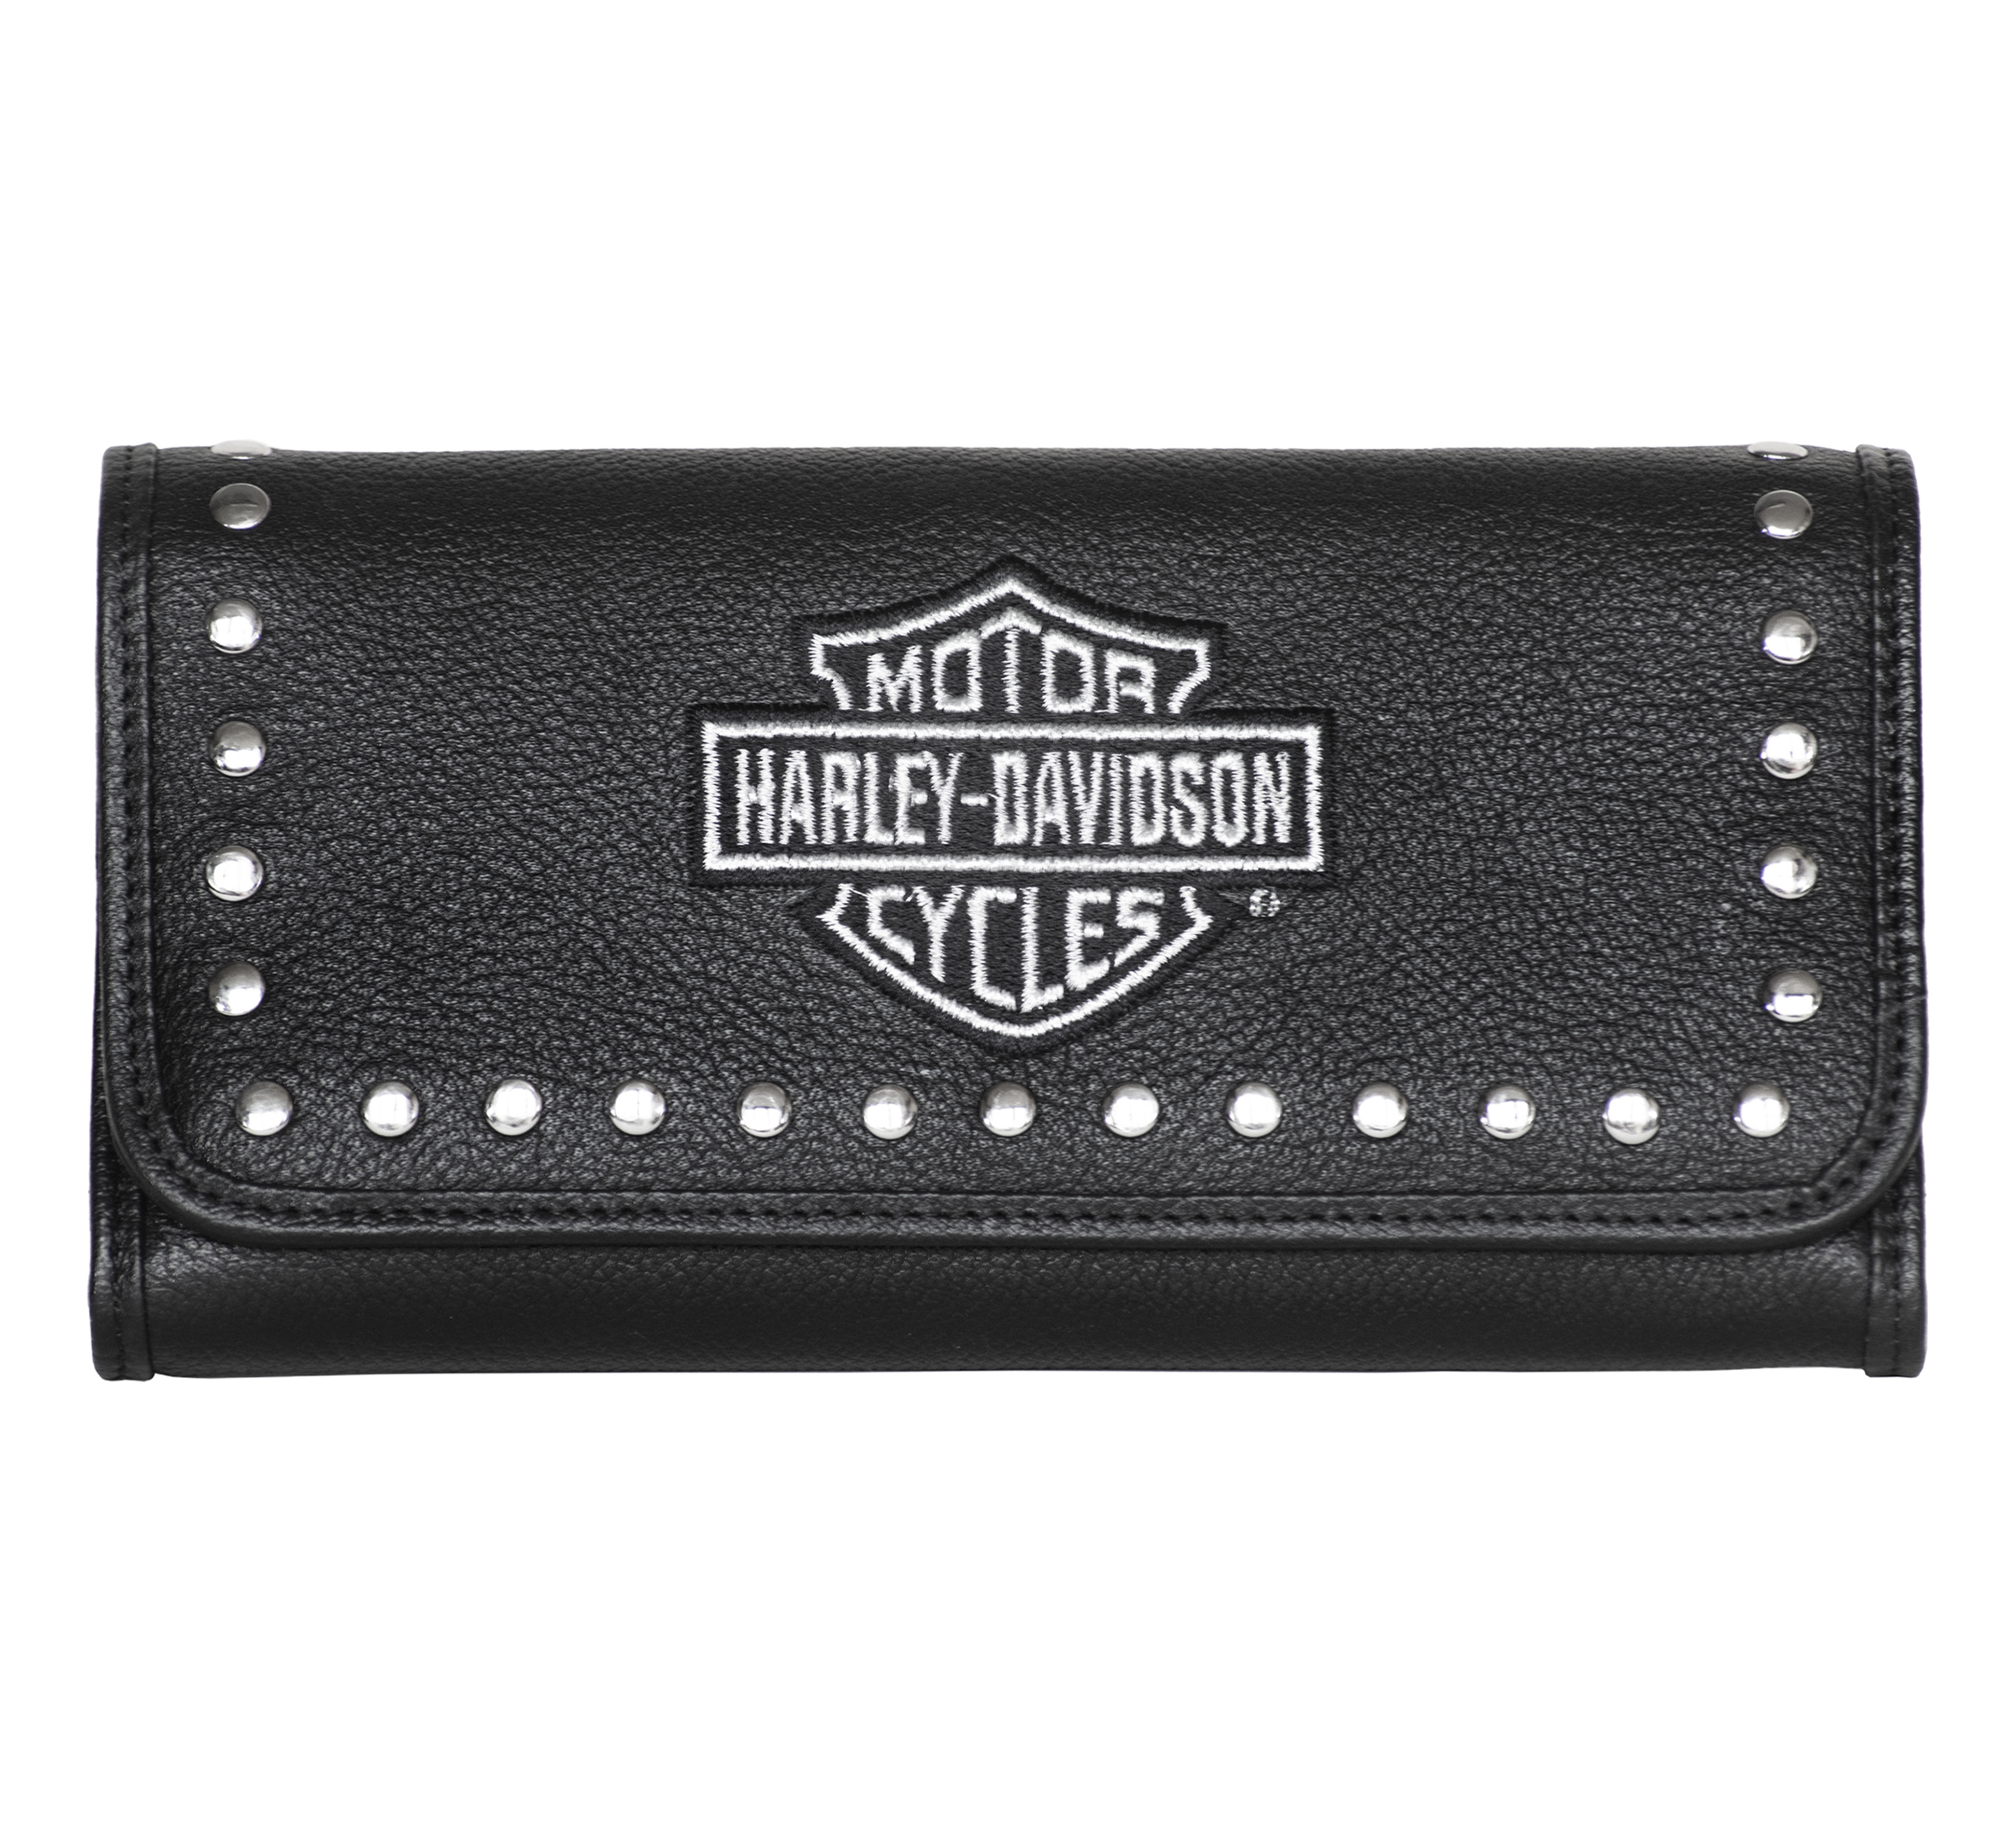 Taxation Indirect attract Women's Embroidery Traditional Wallet | Harley-Davidson APAC